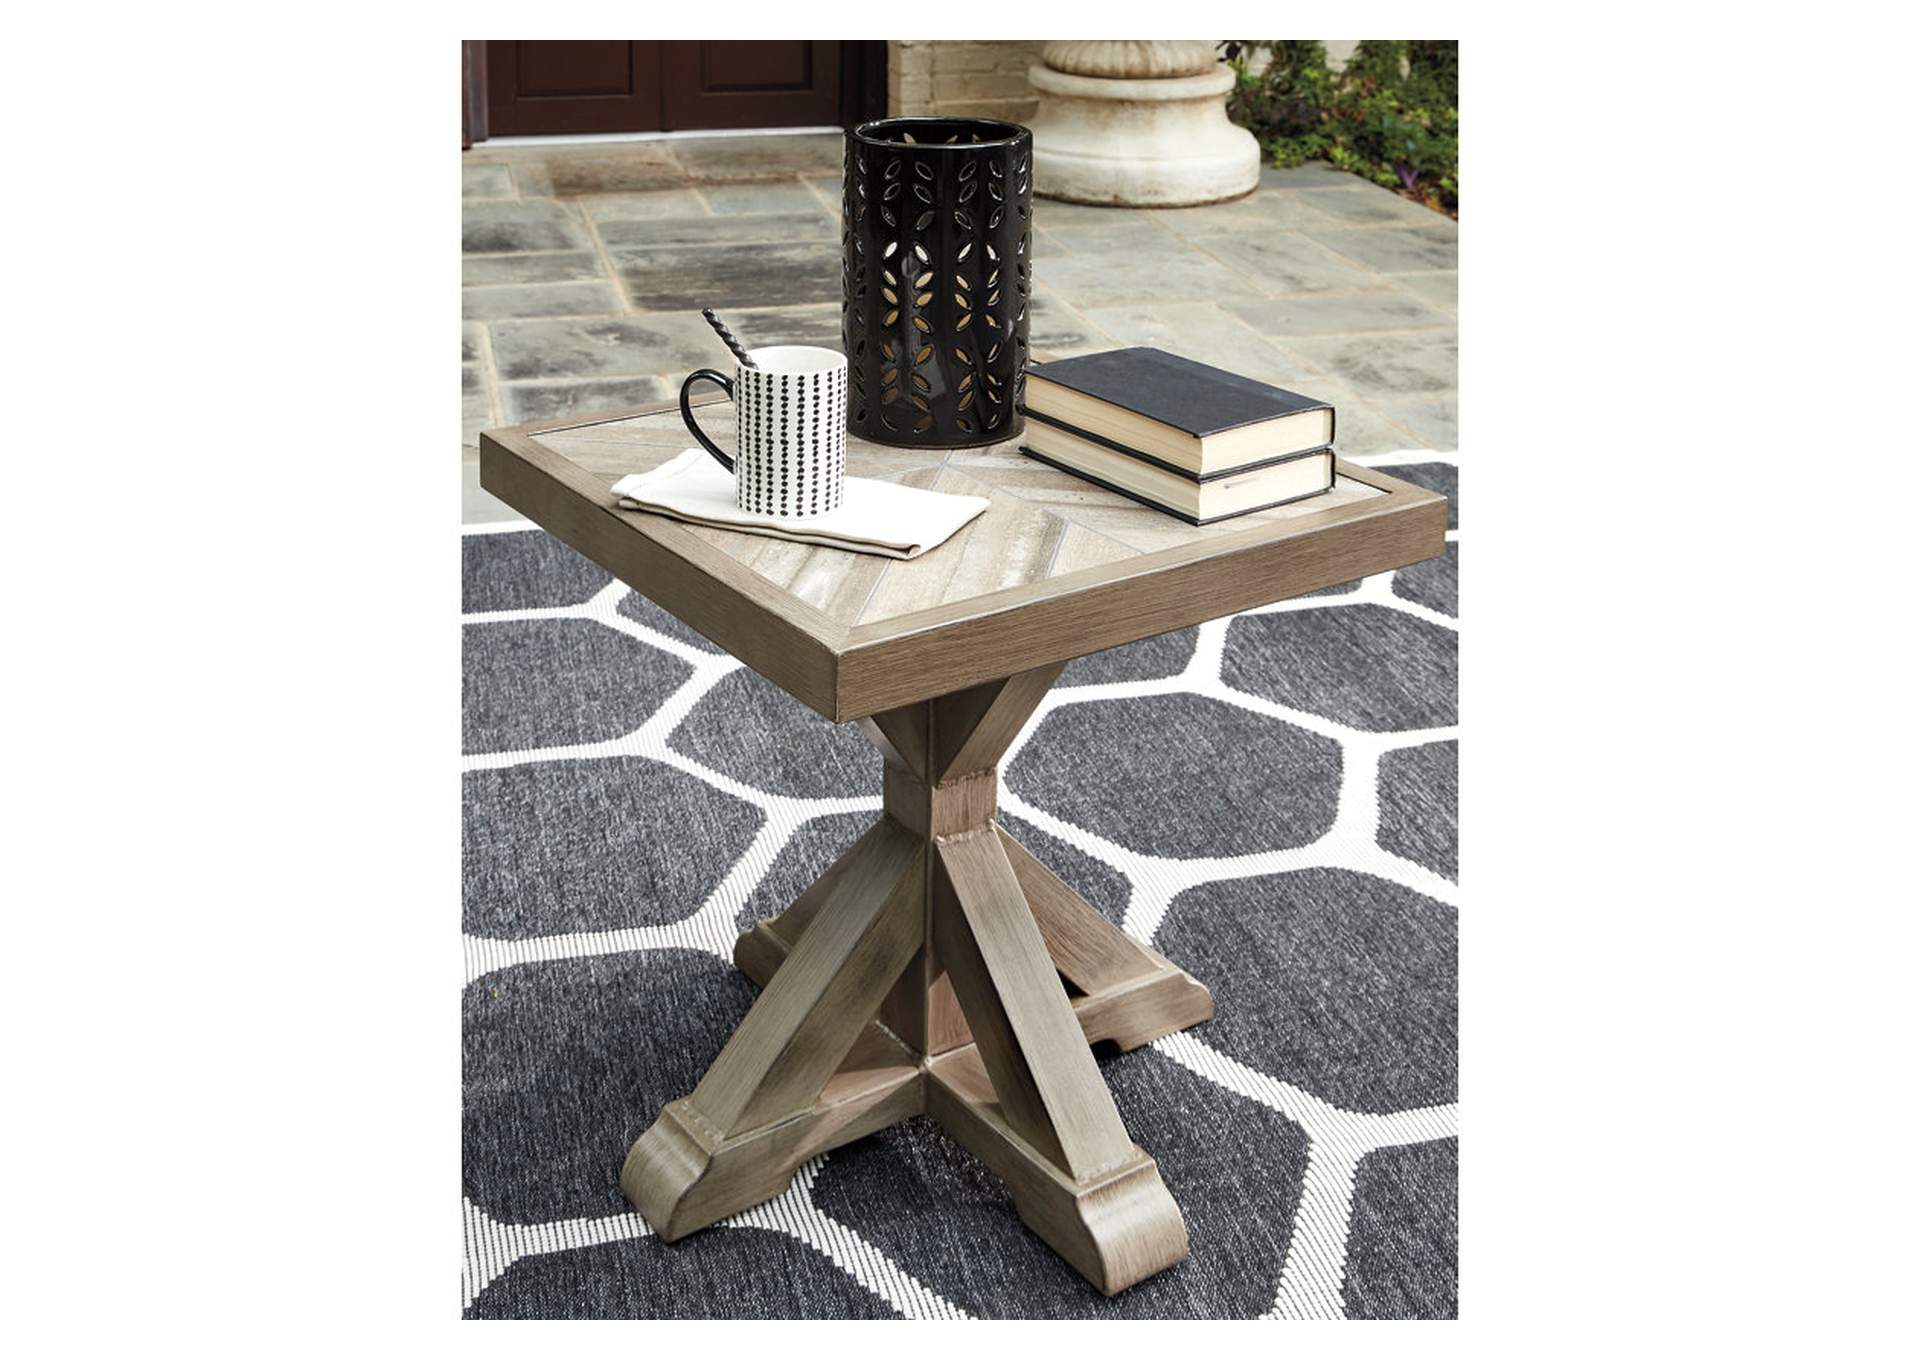 Beachcroft End Table,Direct To Consumer Express